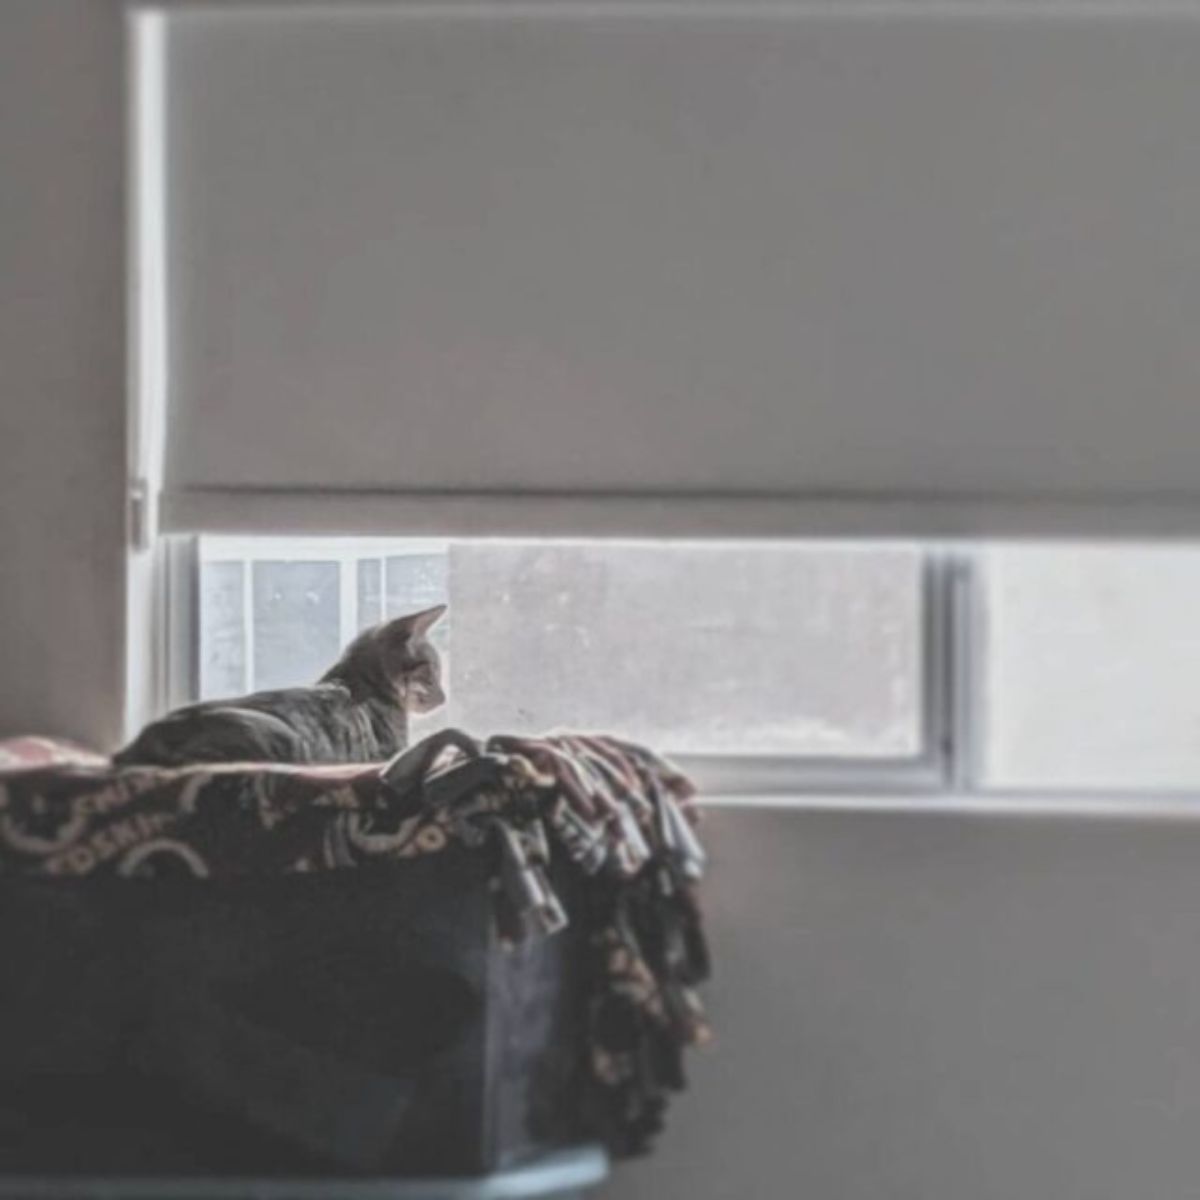 grey tabby cat laying on a blanket by a window